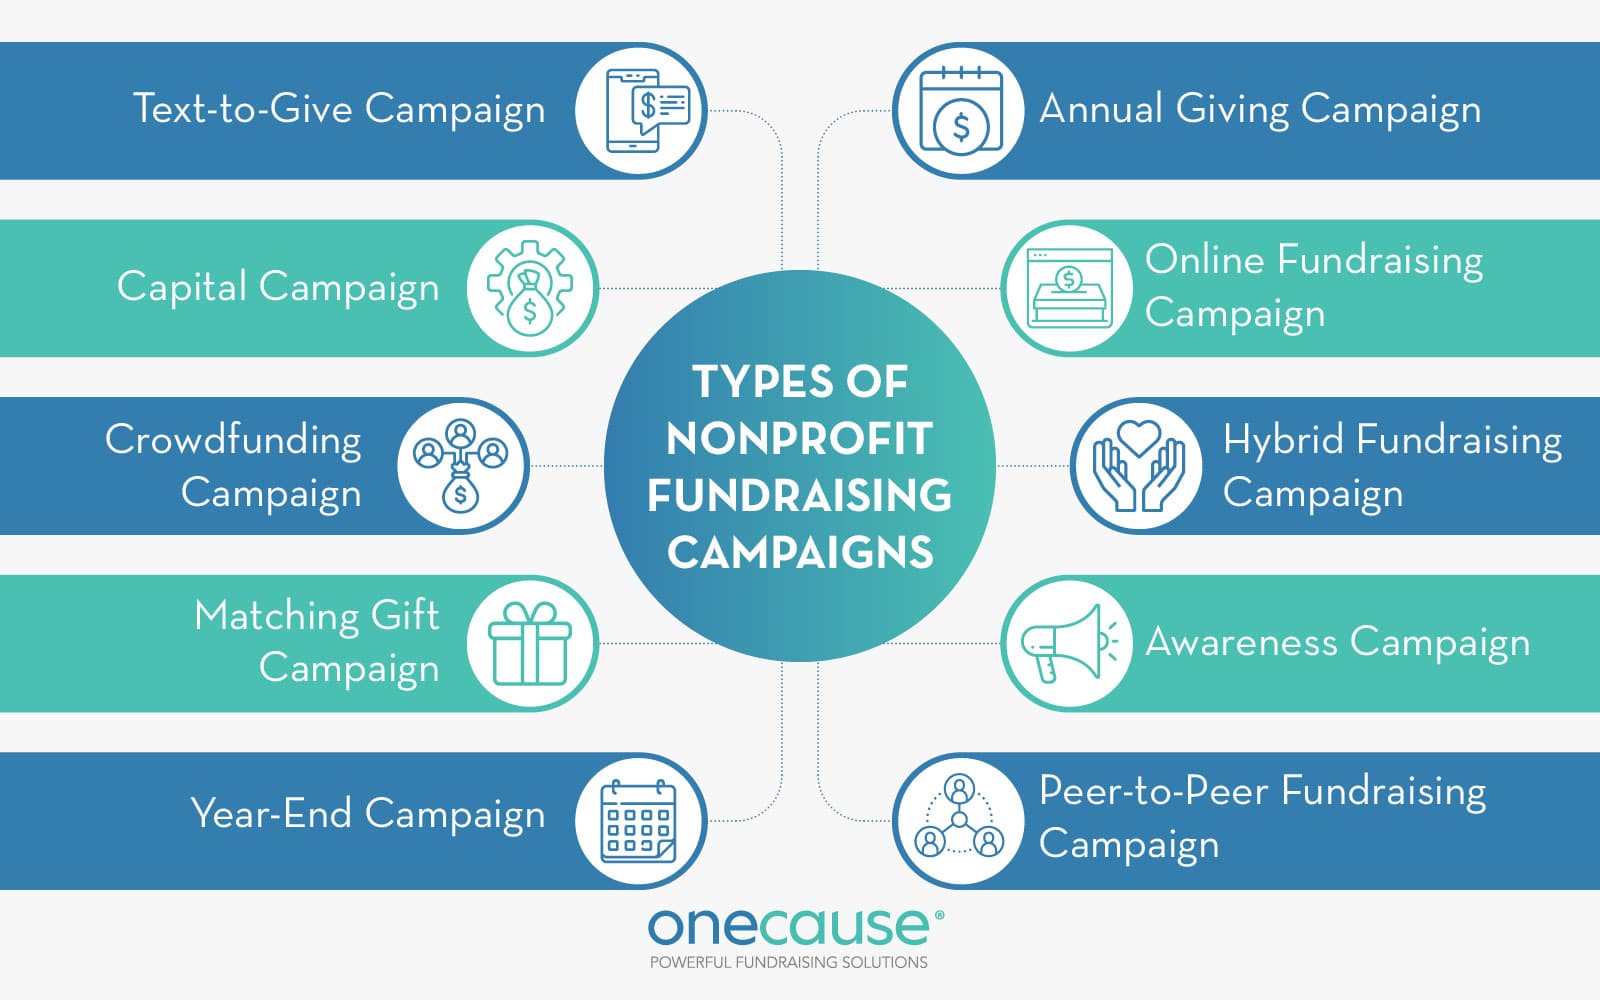 There are several types of fundraising campaigns your nonprofit can leverage to support your mission.